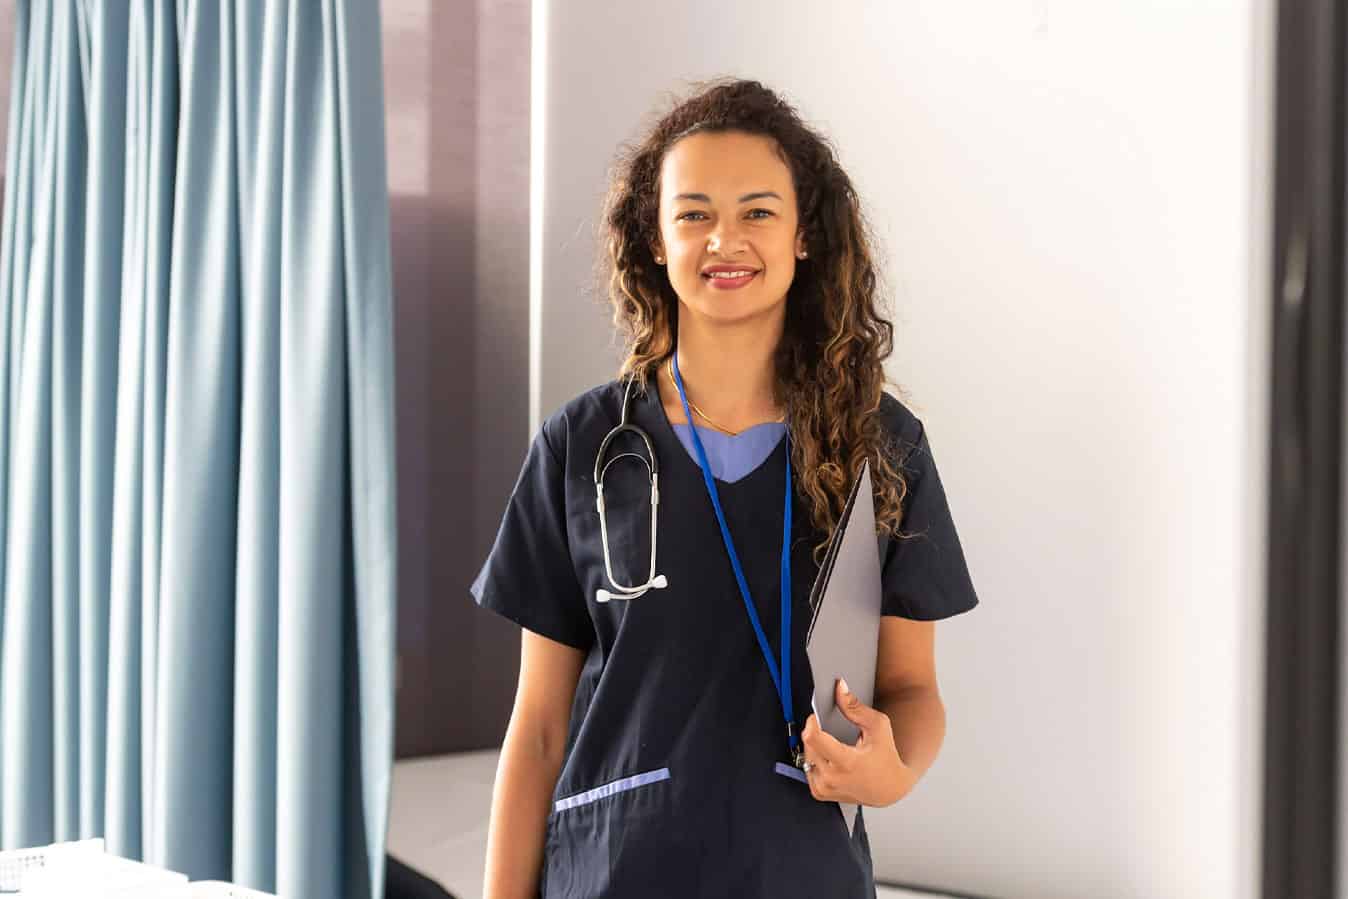 Study: What would help retention of early career nurses in regional and rural areas?